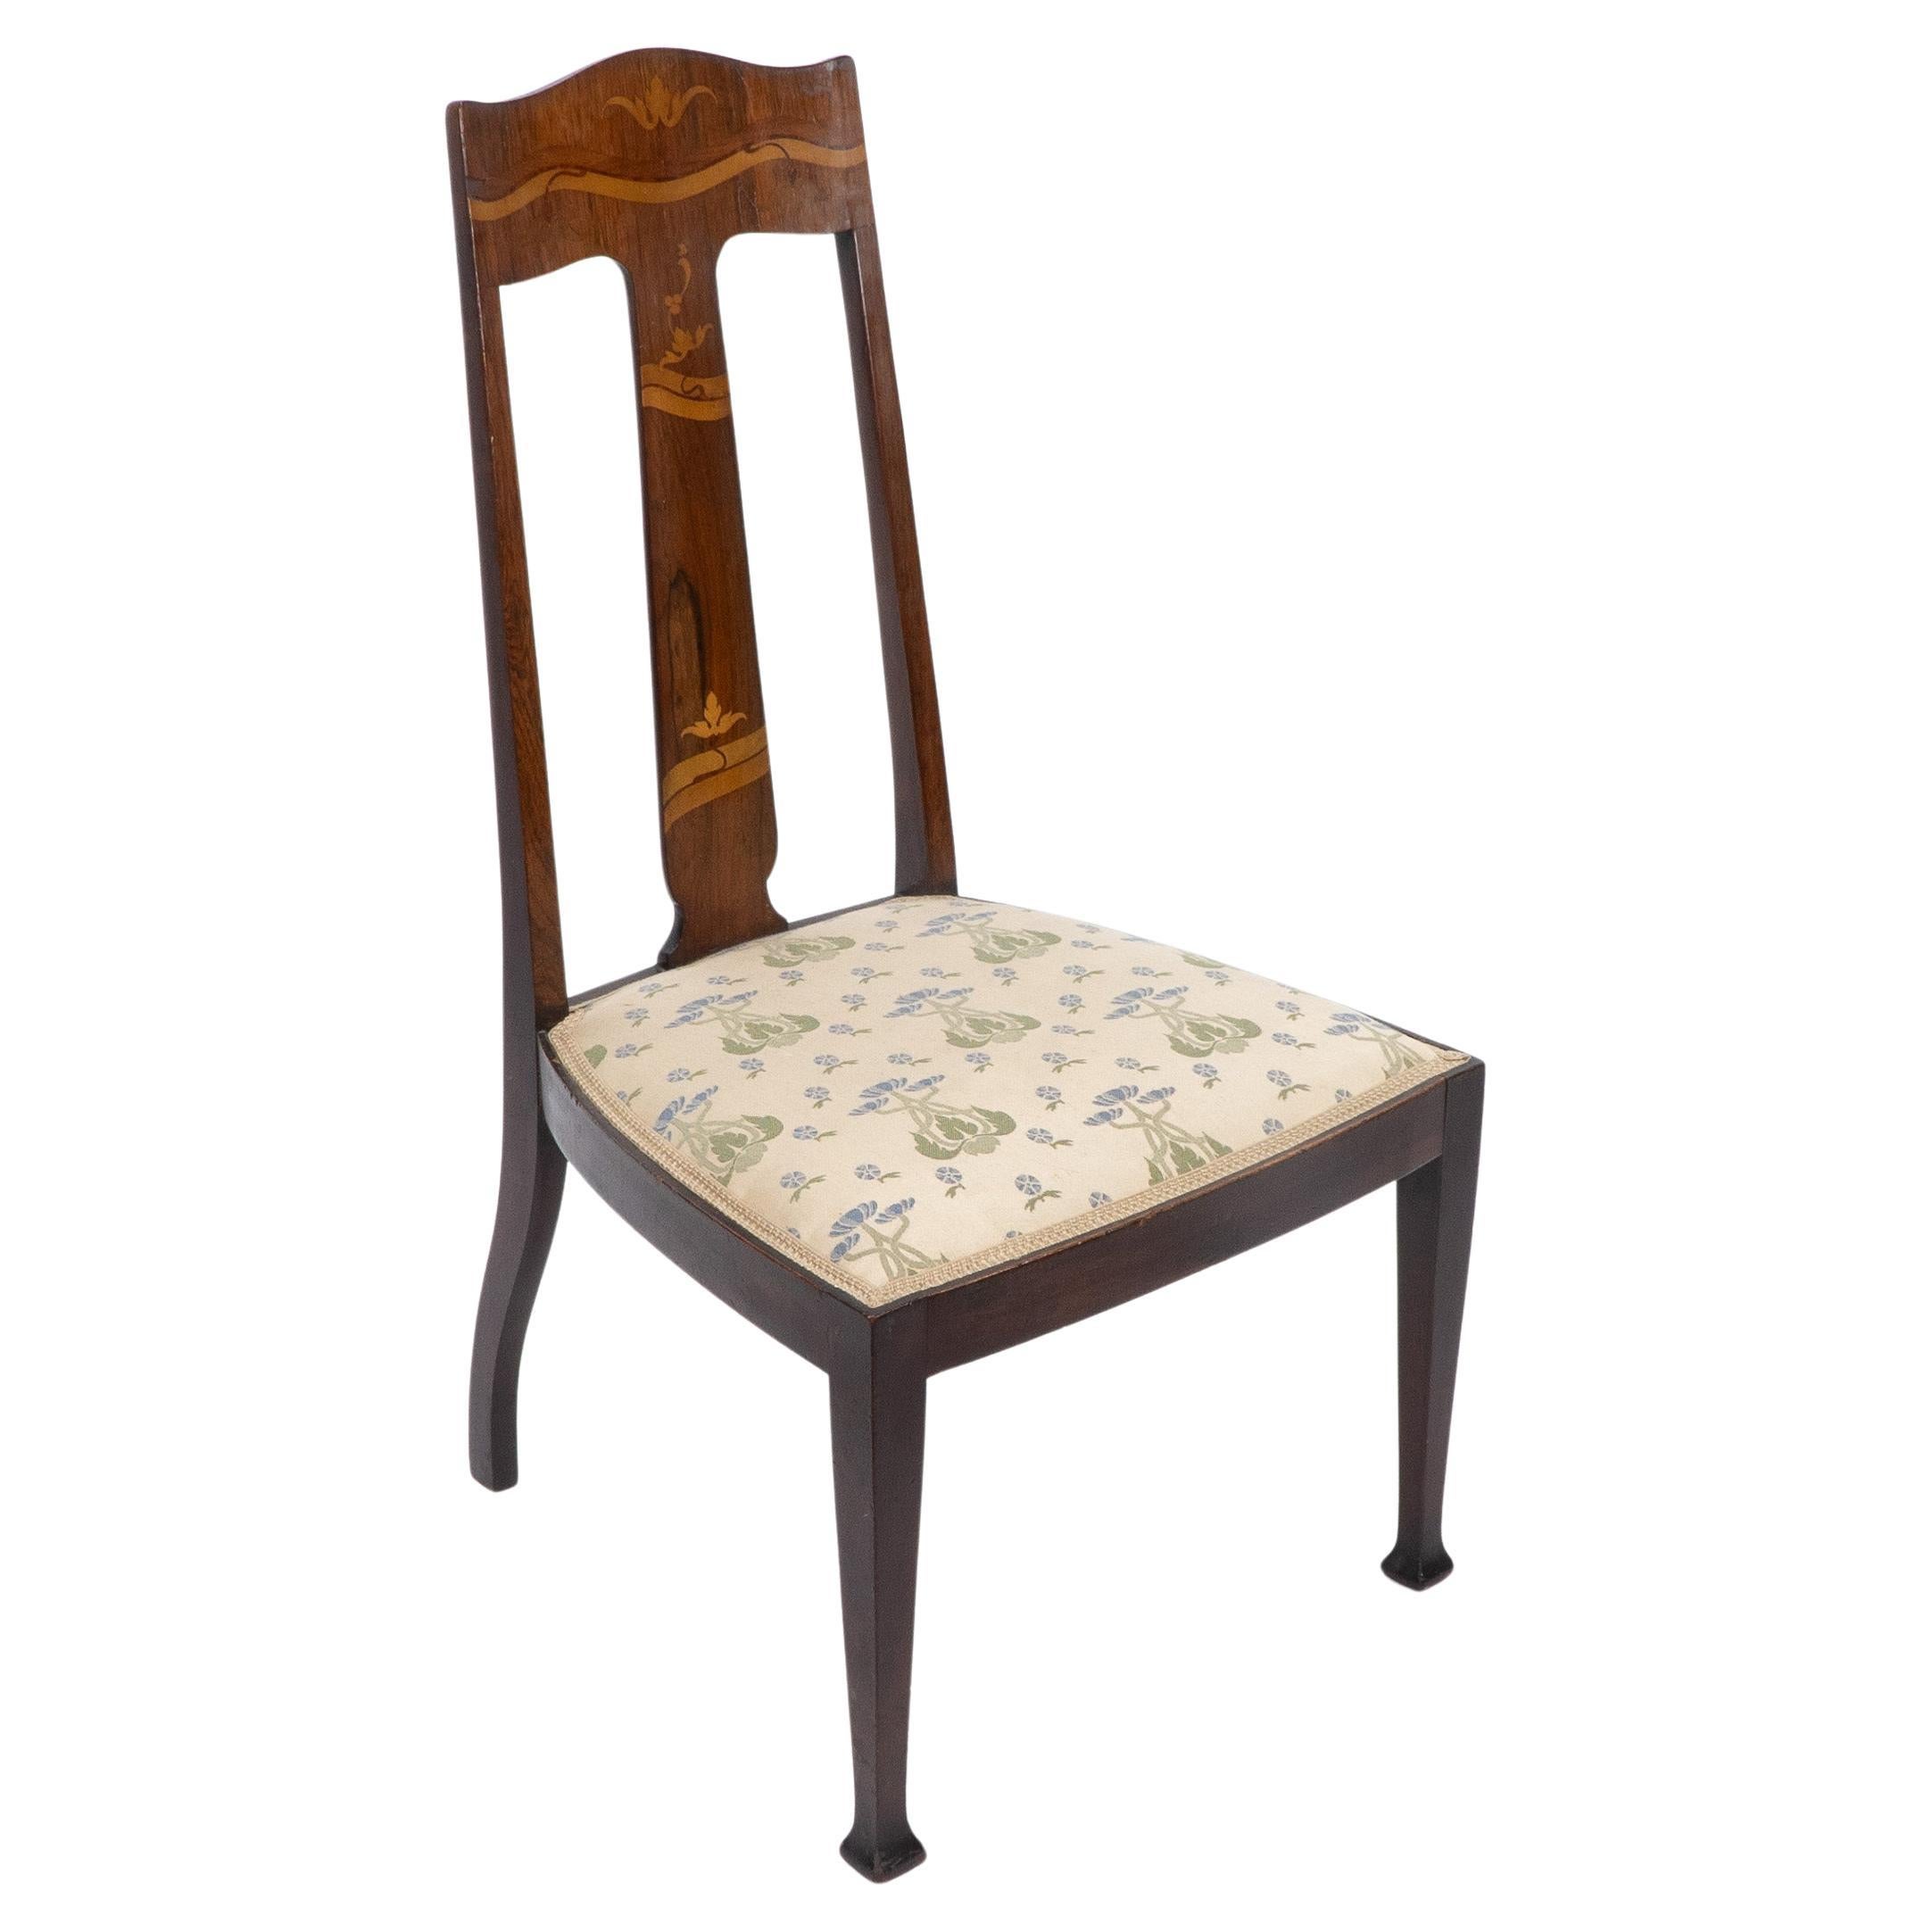 Jas Shoolbred. Arts & Crafts Mahogany Rosewood Chair With stylized Floral Inlay For Sale